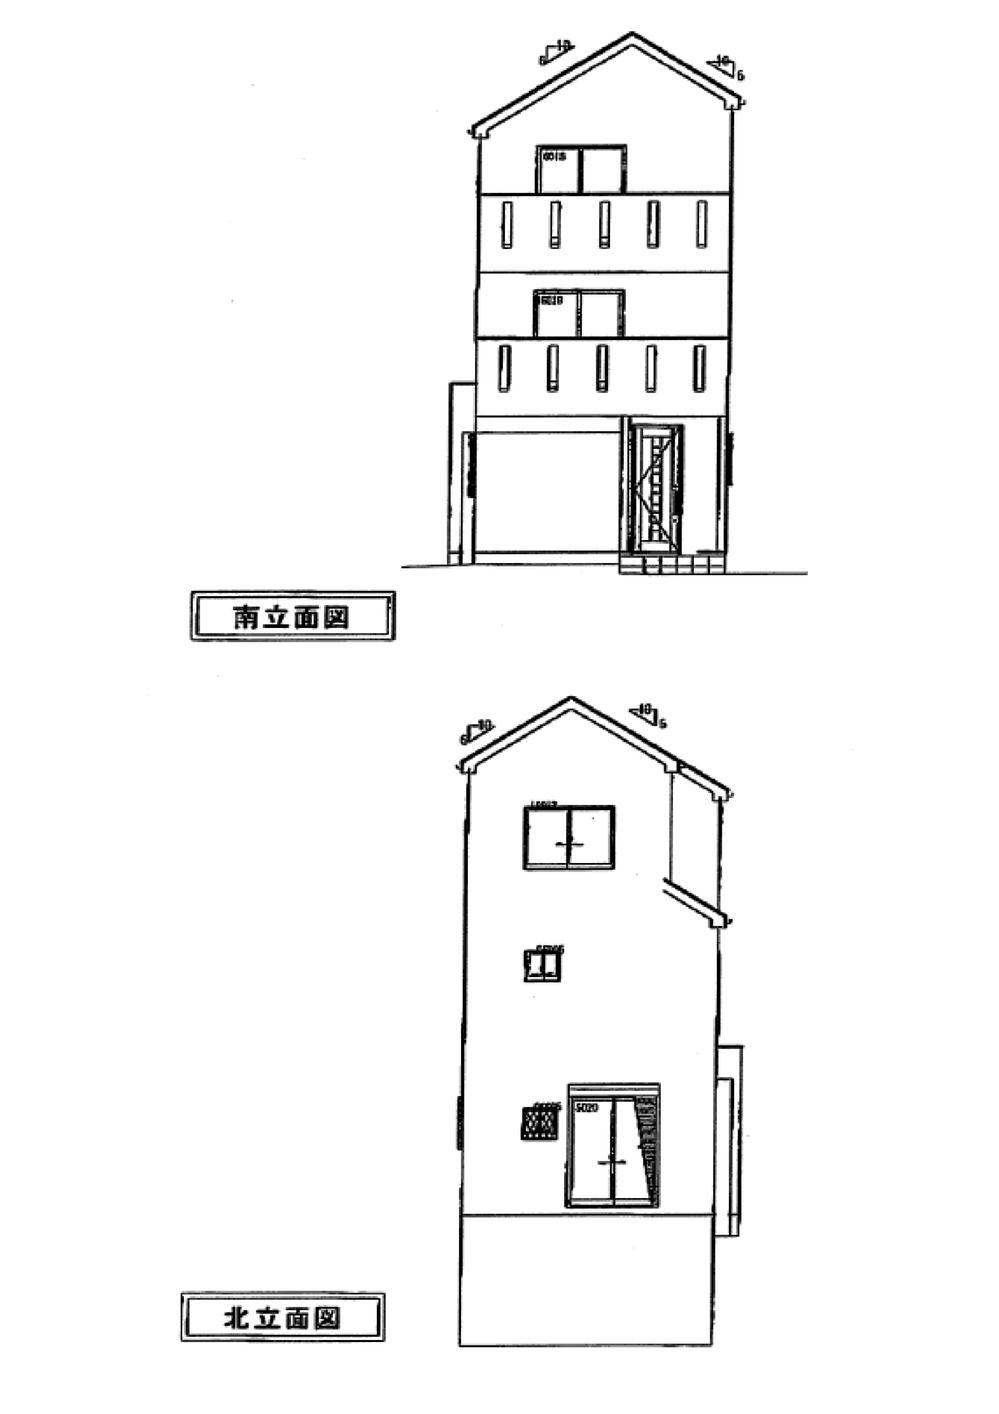 Other. South elevation view ・ Kitaritsu view